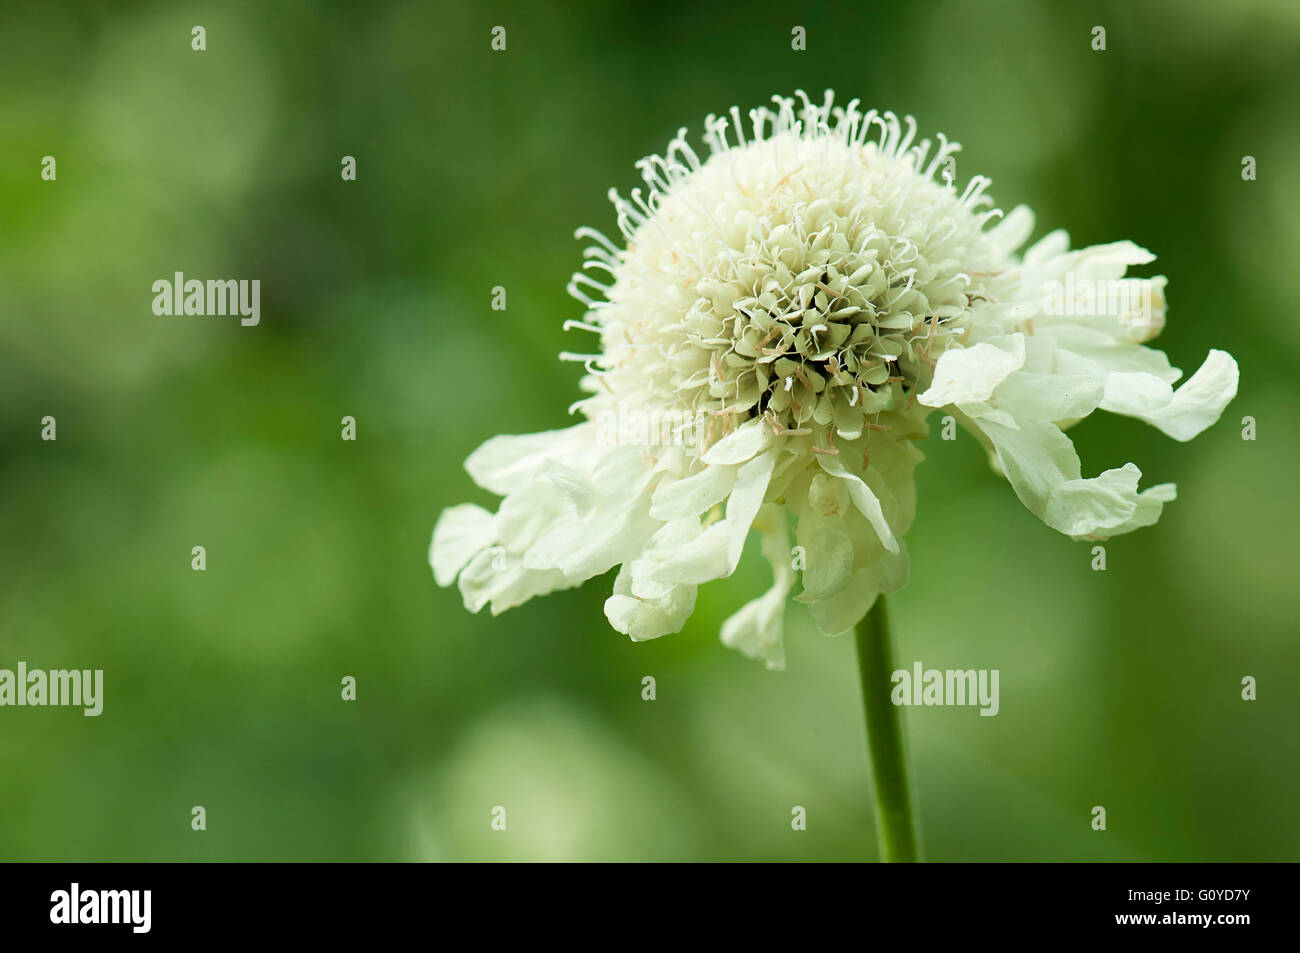 Scabious, Yellow scabious, Cephalaria, Cephalaria gigantea, Asia indigenous, Beauty in Nature, Colour, Creative, Europe indigenous, Flower, Summer Flowering, Frost hardy, Growing, Outdoor, Pastel Colour, Perennial, Plant, Stamen, Wild flower, White, Green, Stock Photo